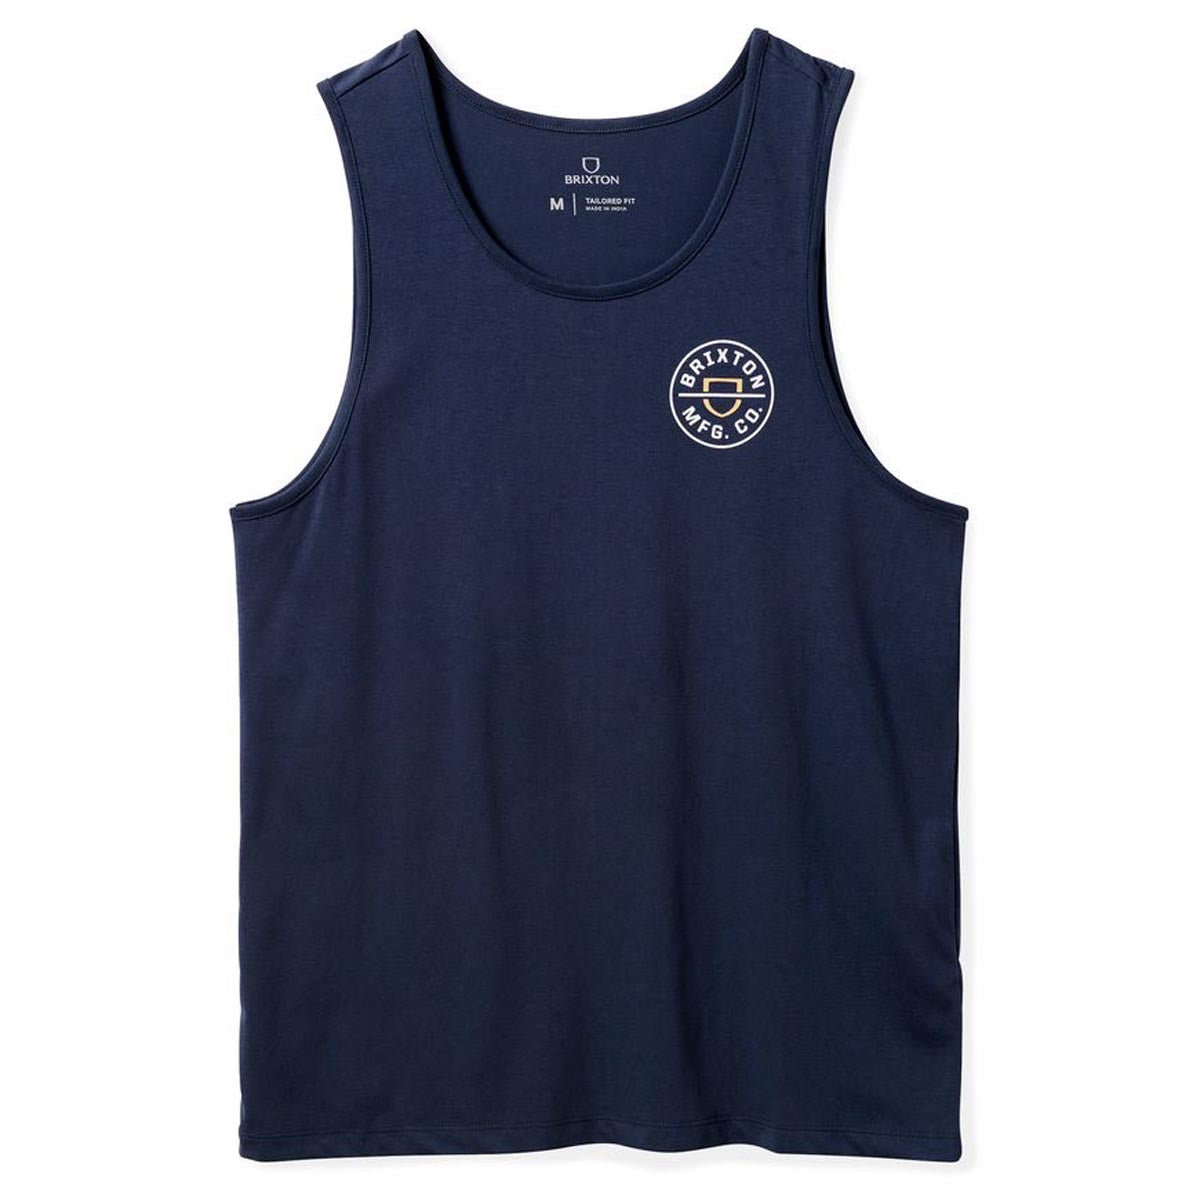 Brixton Crest Tank Top - Washed Navy/Off White image 1